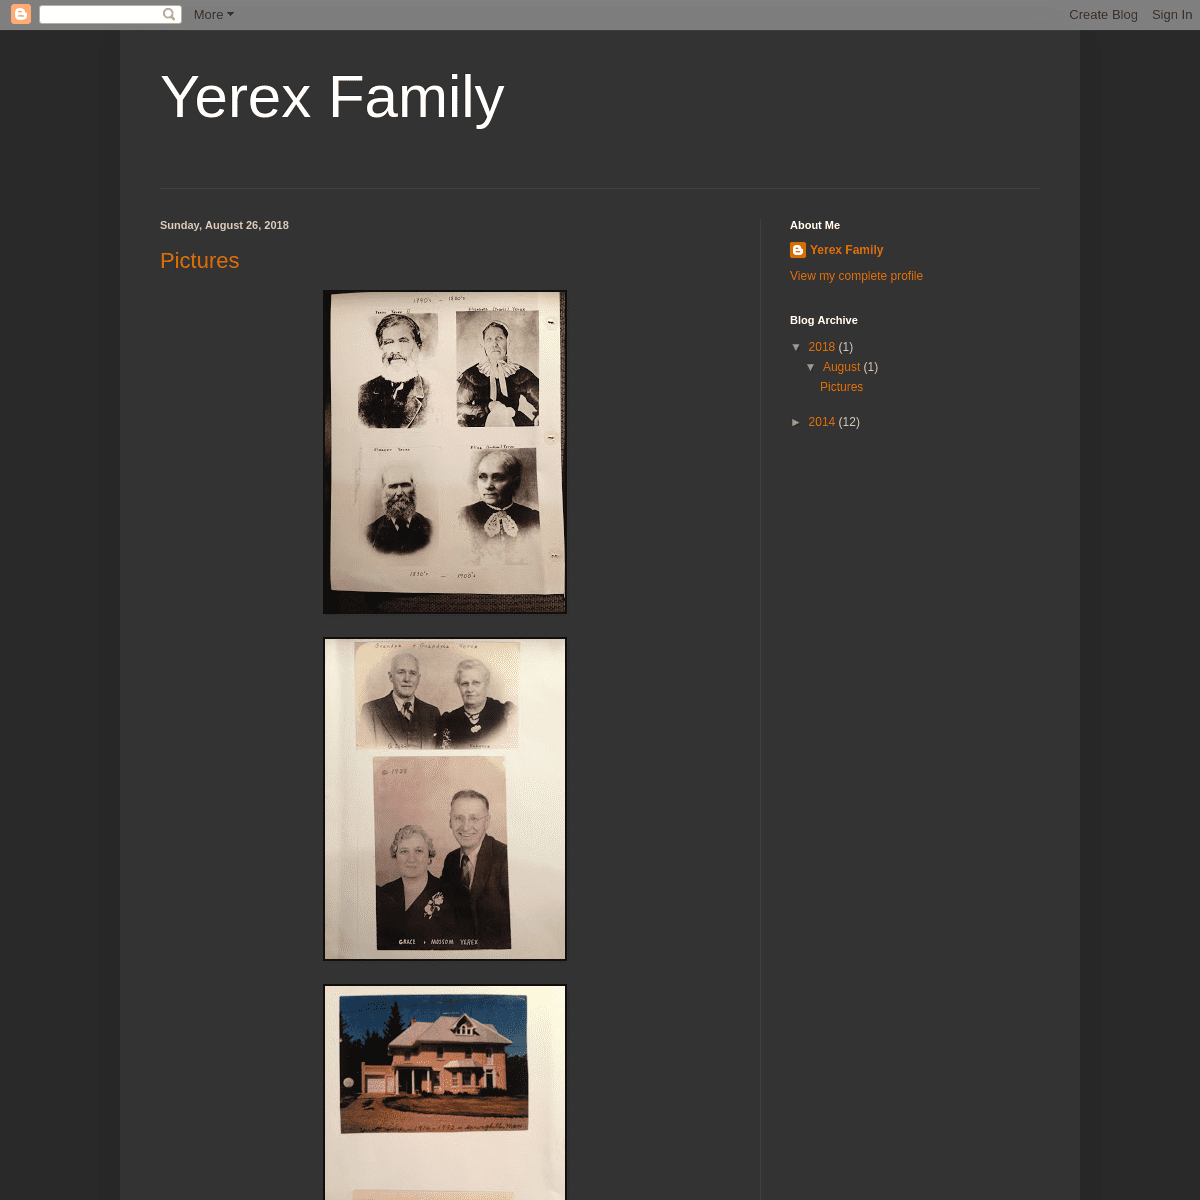 A complete backup of yerexfamily.blogspot.com